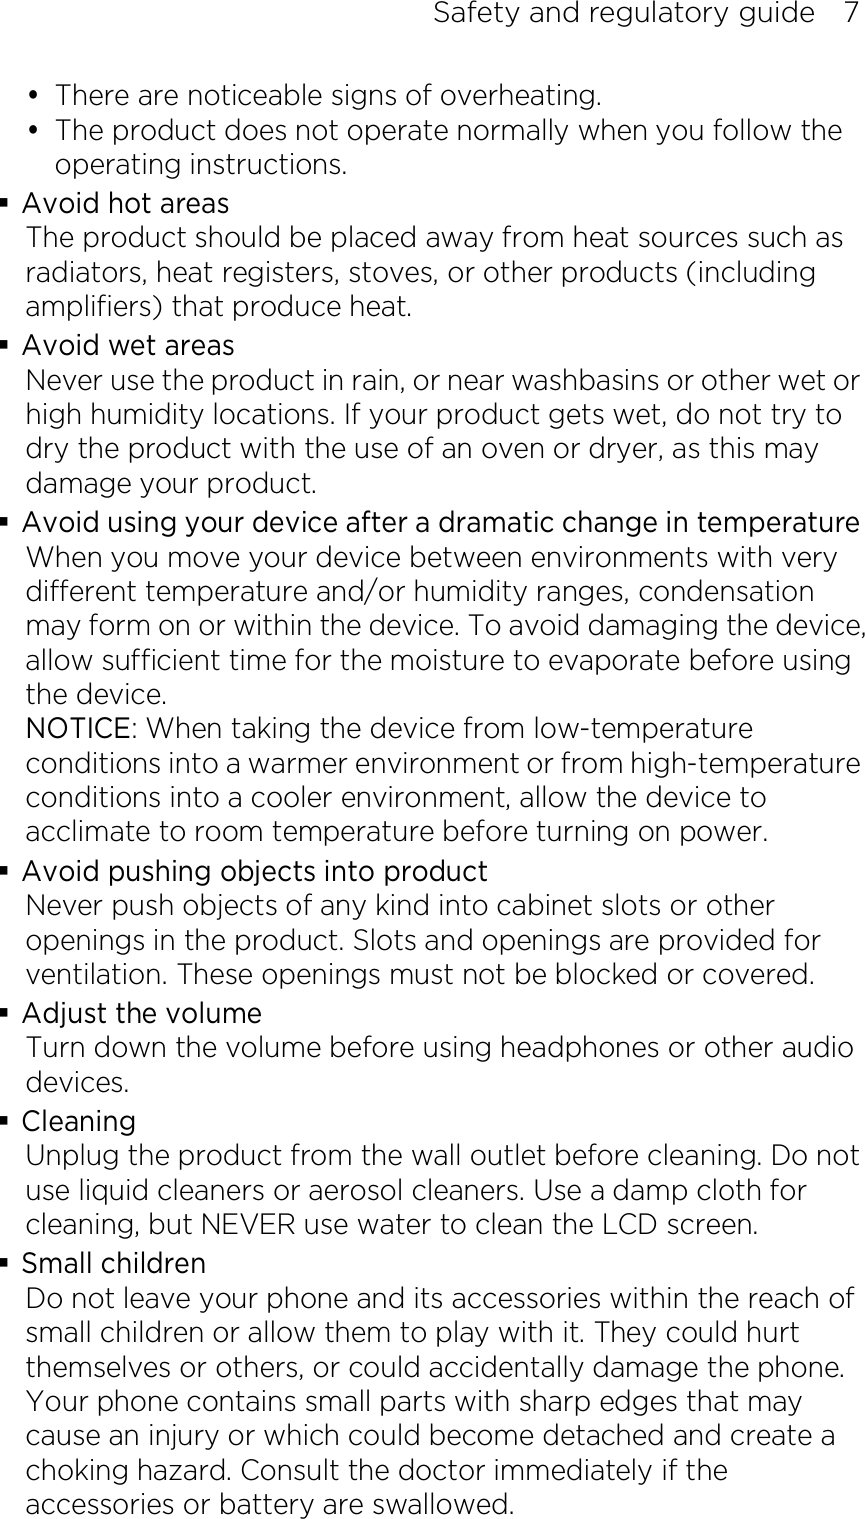 Safety and regulatory guide    7  There are noticeable signs of overheating.  The product does not operate normally when you follow the operating instructions.  Avoid hot areas The product should be placed away from heat sources such as radiators, heat registers, stoves, or other products (including amplifiers) that produce heat.  Avoid wet areas Never use the product in rain, or near washbasins or other wet or high humidity locations. If your product gets wet, do not try to dry the product with the use of an oven or dryer, as this may damage your product.  Avoid using your device after a dramatic change in temperature When you move your device between environments with very different temperature and/or humidity ranges, condensation may form on or within the device. To avoid damaging the device, allow sufficient time for the moisture to evaporate before using the device. NOTICE: When taking the device from low-temperature conditions into a warmer environment or from high-temperature conditions into a cooler environment, allow the device to acclimate to room temperature before turning on power.  Avoid pushing objects into product Never push objects of any kind into cabinet slots or other openings in the product. Slots and openings are provided for ventilation. These openings must not be blocked or covered.  Adjust the volume Turn down the volume before using headphones or other audio devices.  Cleaning Unplug the product from the wall outlet before cleaning. Do not use liquid cleaners or aerosol cleaners. Use a damp cloth for cleaning, but NEVER use water to clean the LCD screen.    Small children Do not leave your phone and its accessories within the reach of small children or allow them to play with it. They could hurt themselves or others, or could accidentally damage the phone. Your phone contains small parts with sharp edges that may cause an injury or which could become detached and create a choking hazard. Consult the doctor immediately if the accessories or battery are swallowed. 